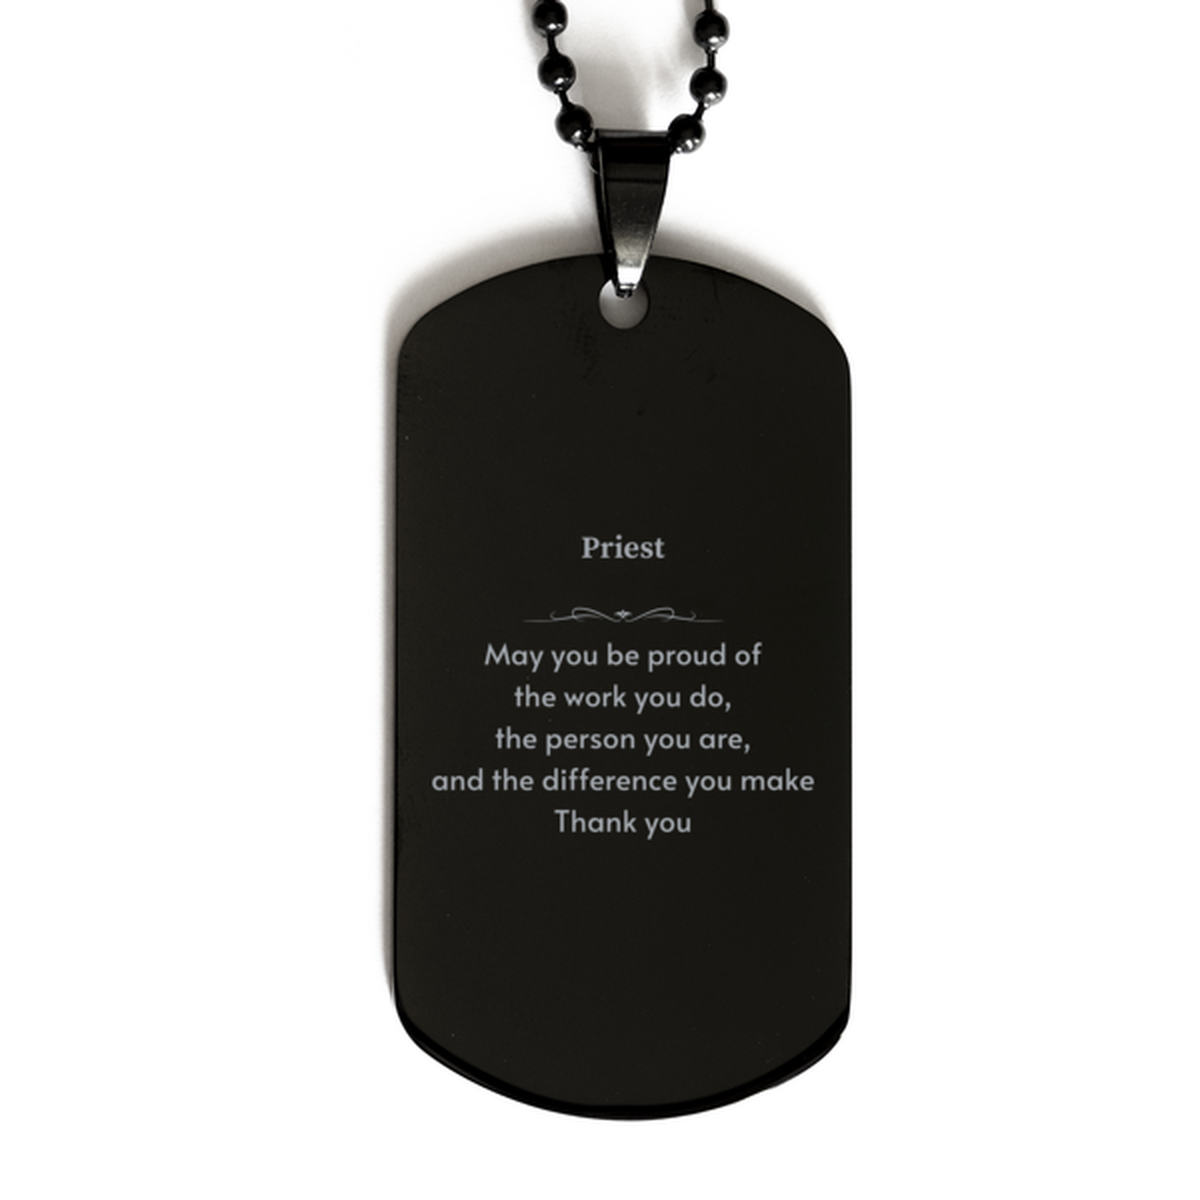 Heartwarming Black Dog Tag Retirement Coworkers Gifts for Priest, Priest May You be proud of the work you do, the person you are Gifts for Boss Men Women Friends